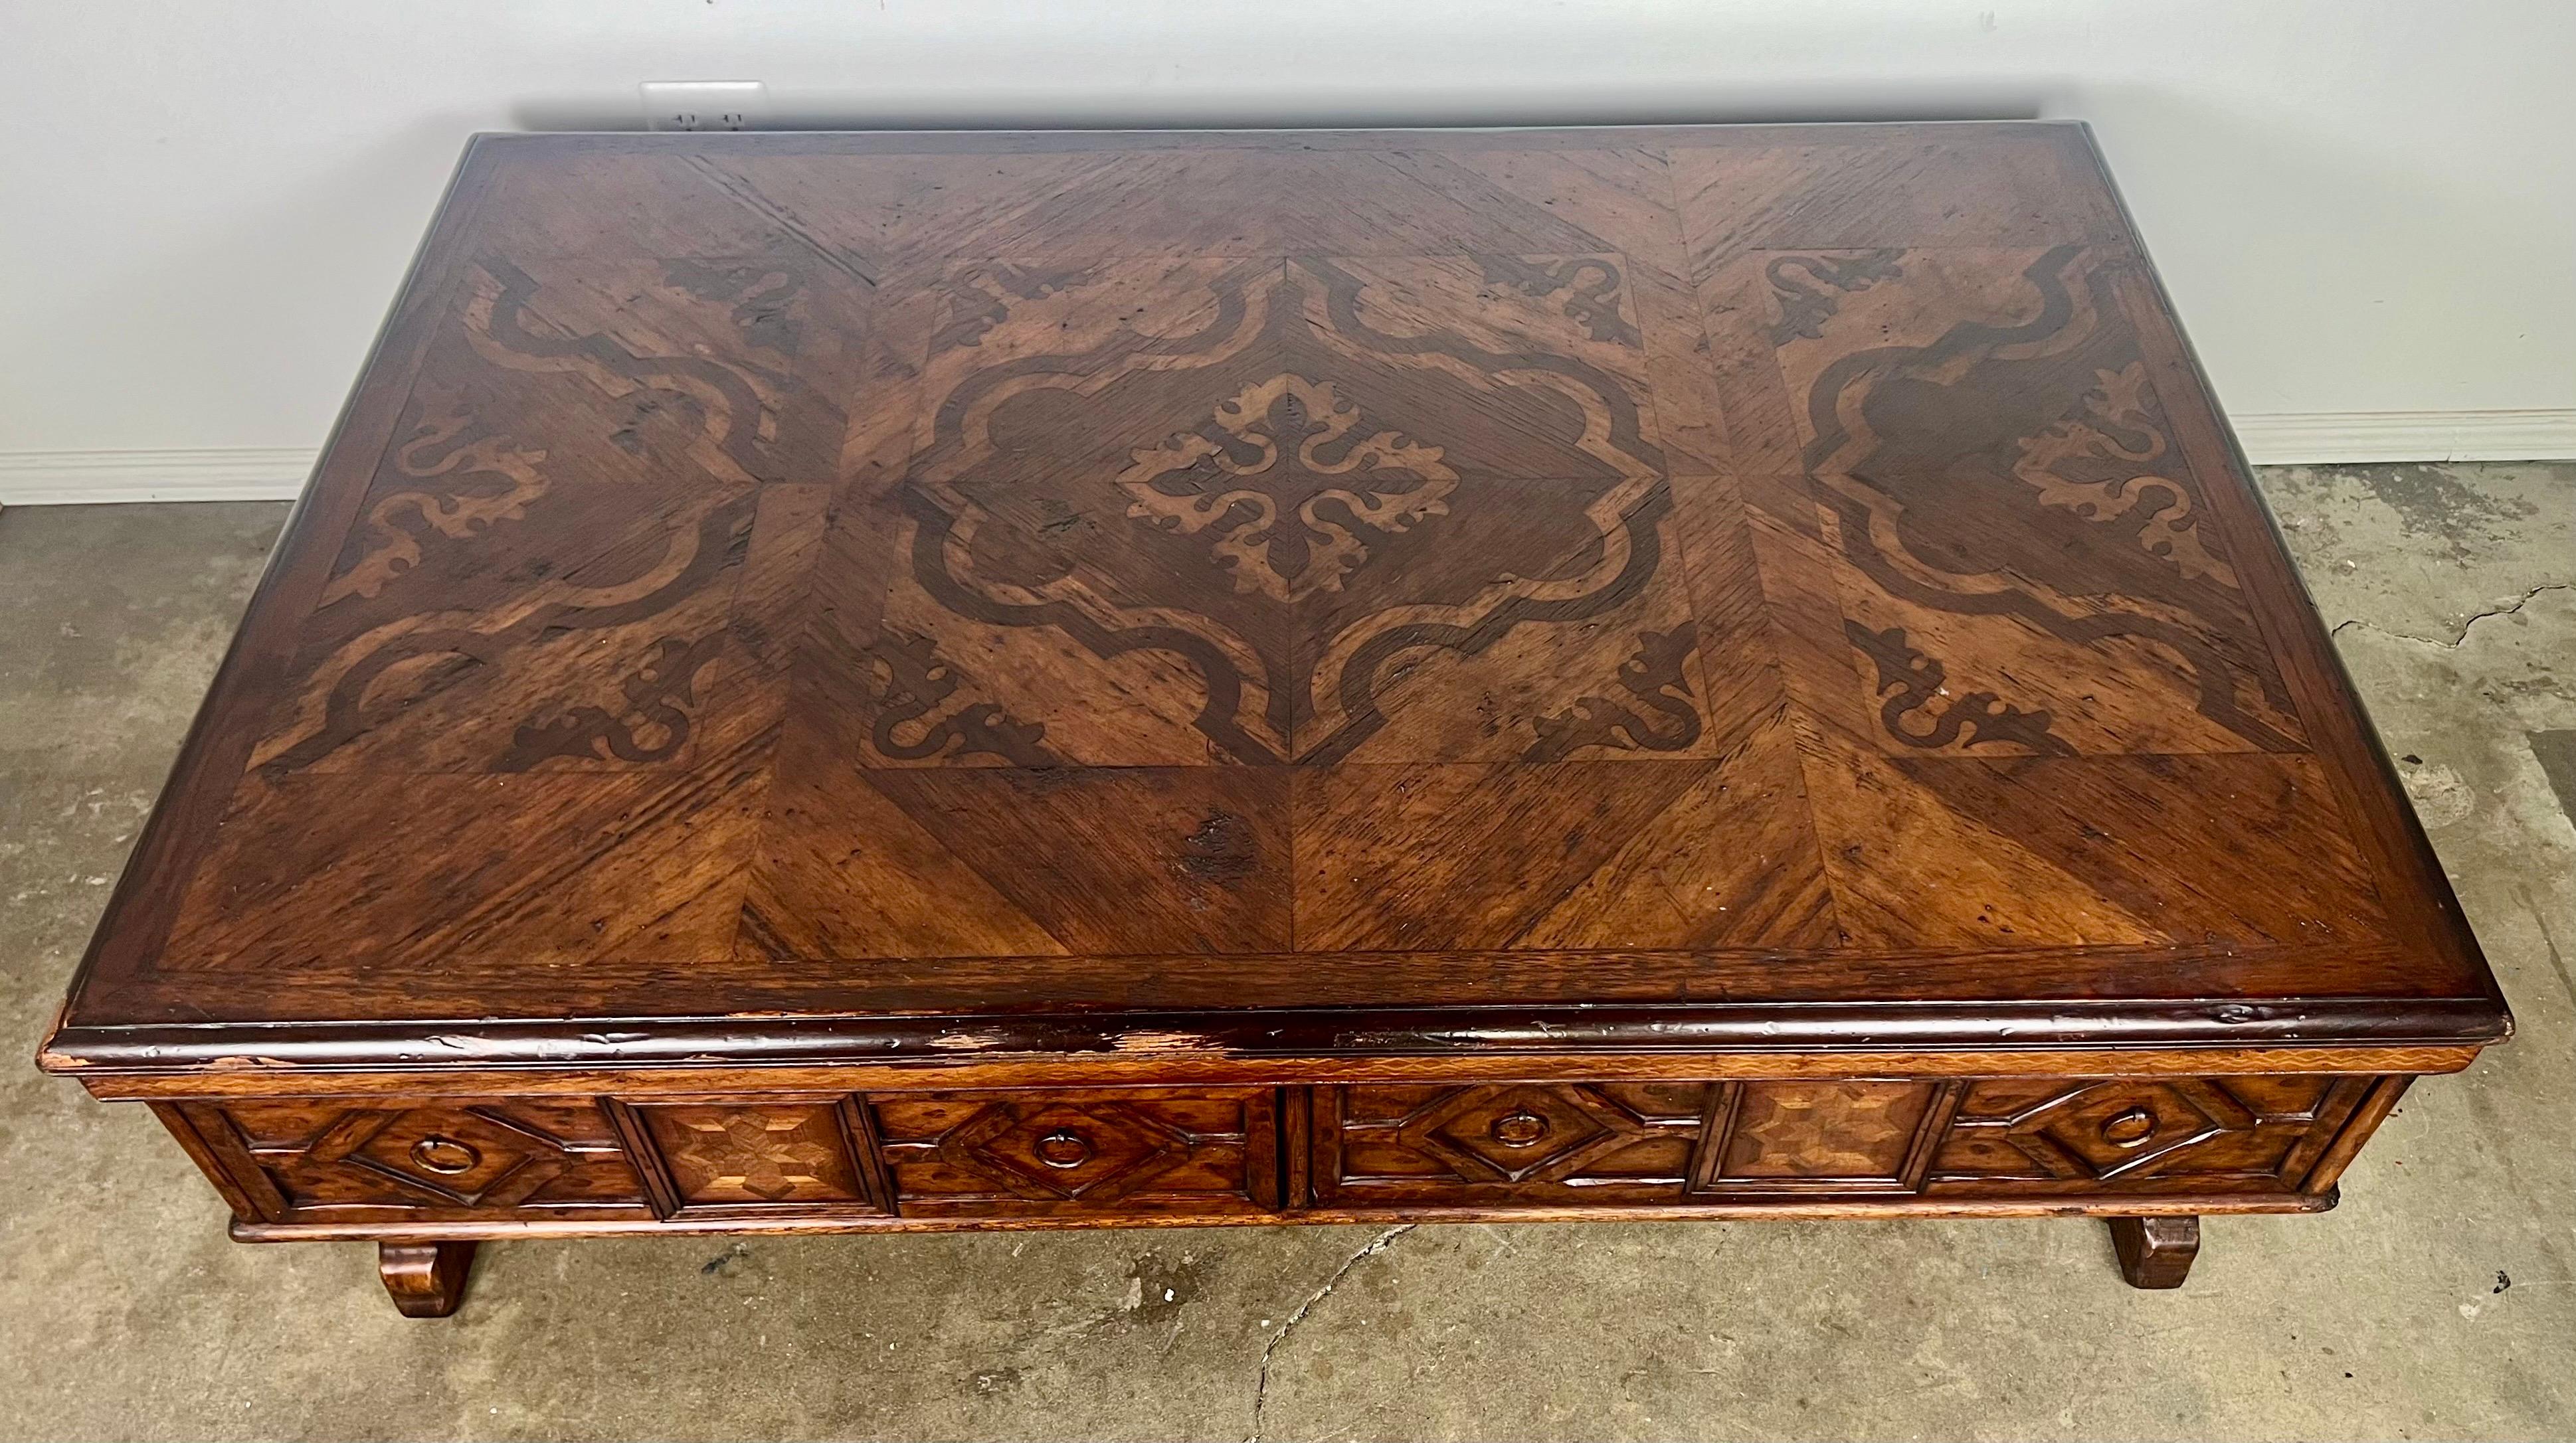 20th Century Monumental Spanish Inlaid Coffee Table w/ Drawers For Sale